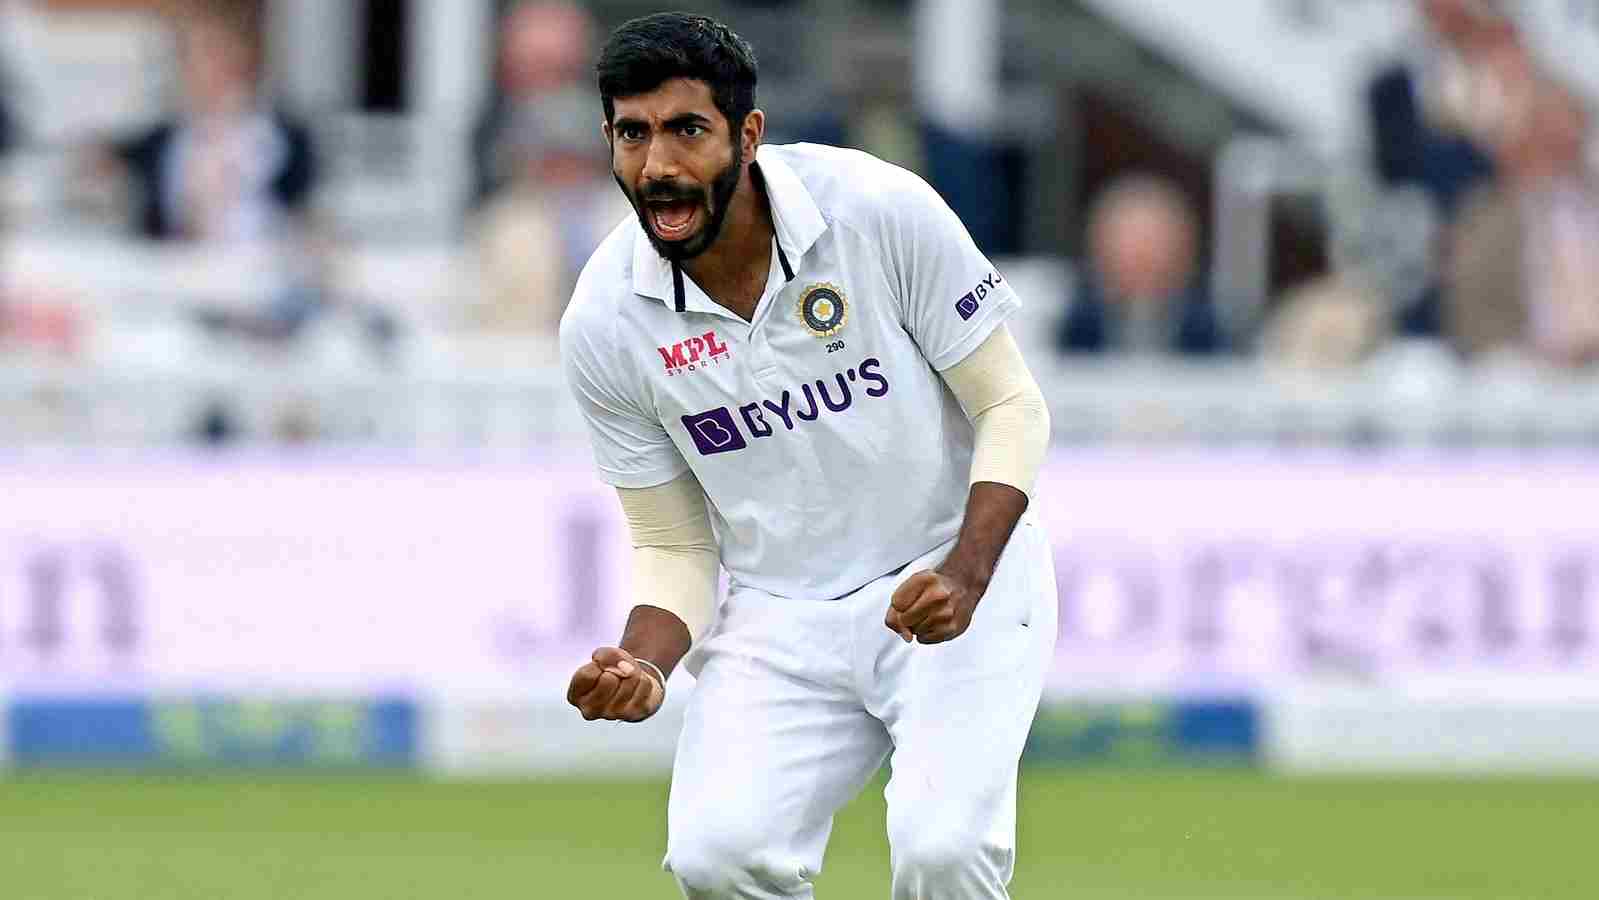 Jasprit Bumrah's Record-Breaking Debut as India's T20I Captain